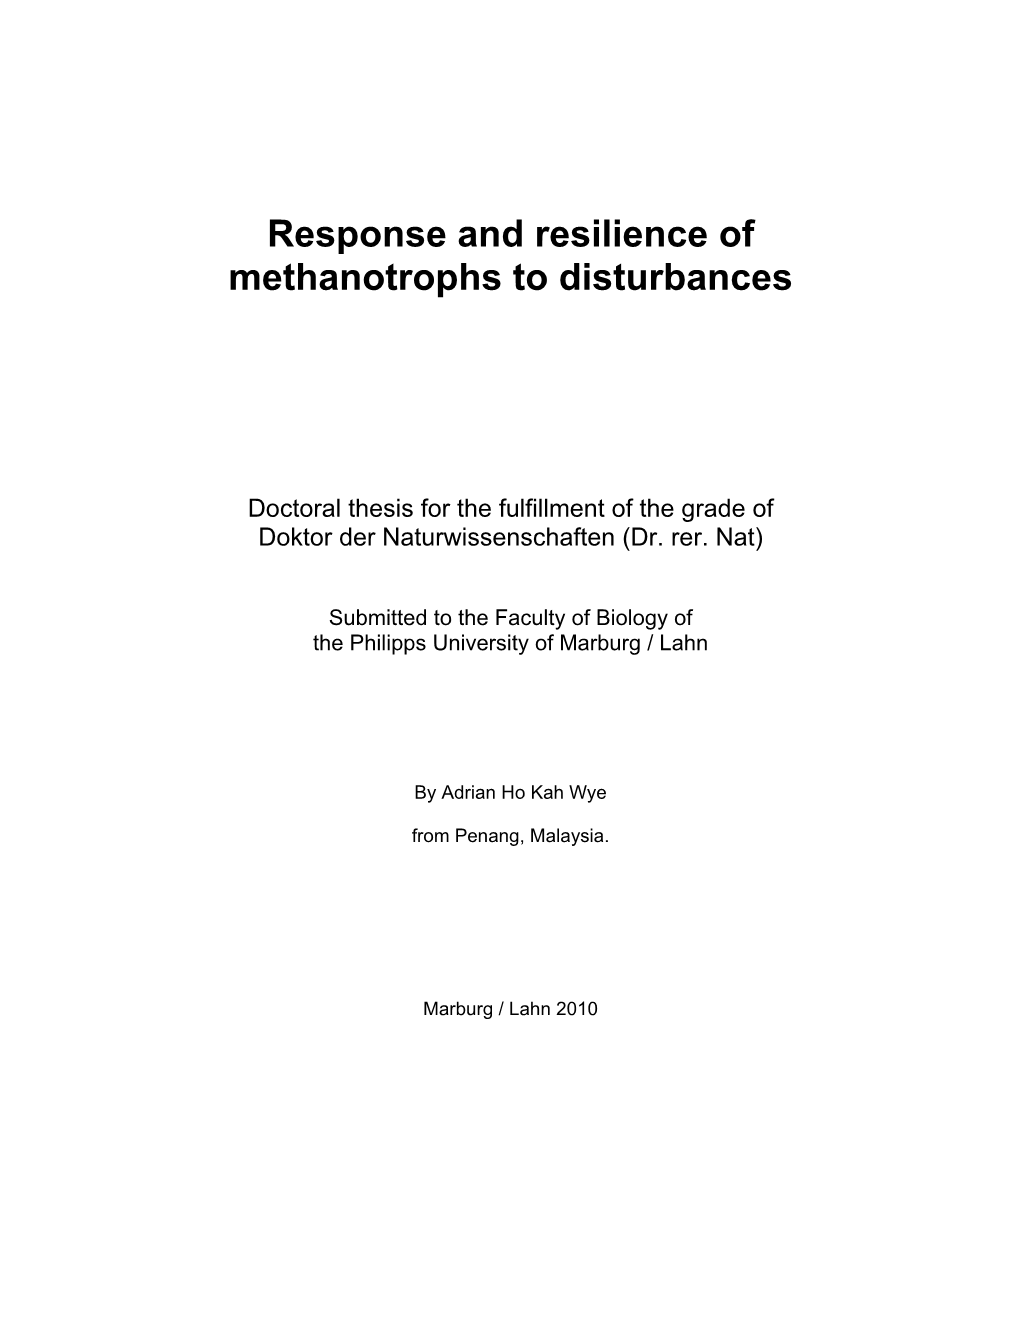 Response and Resilience of Methanotrophs to Disturbances